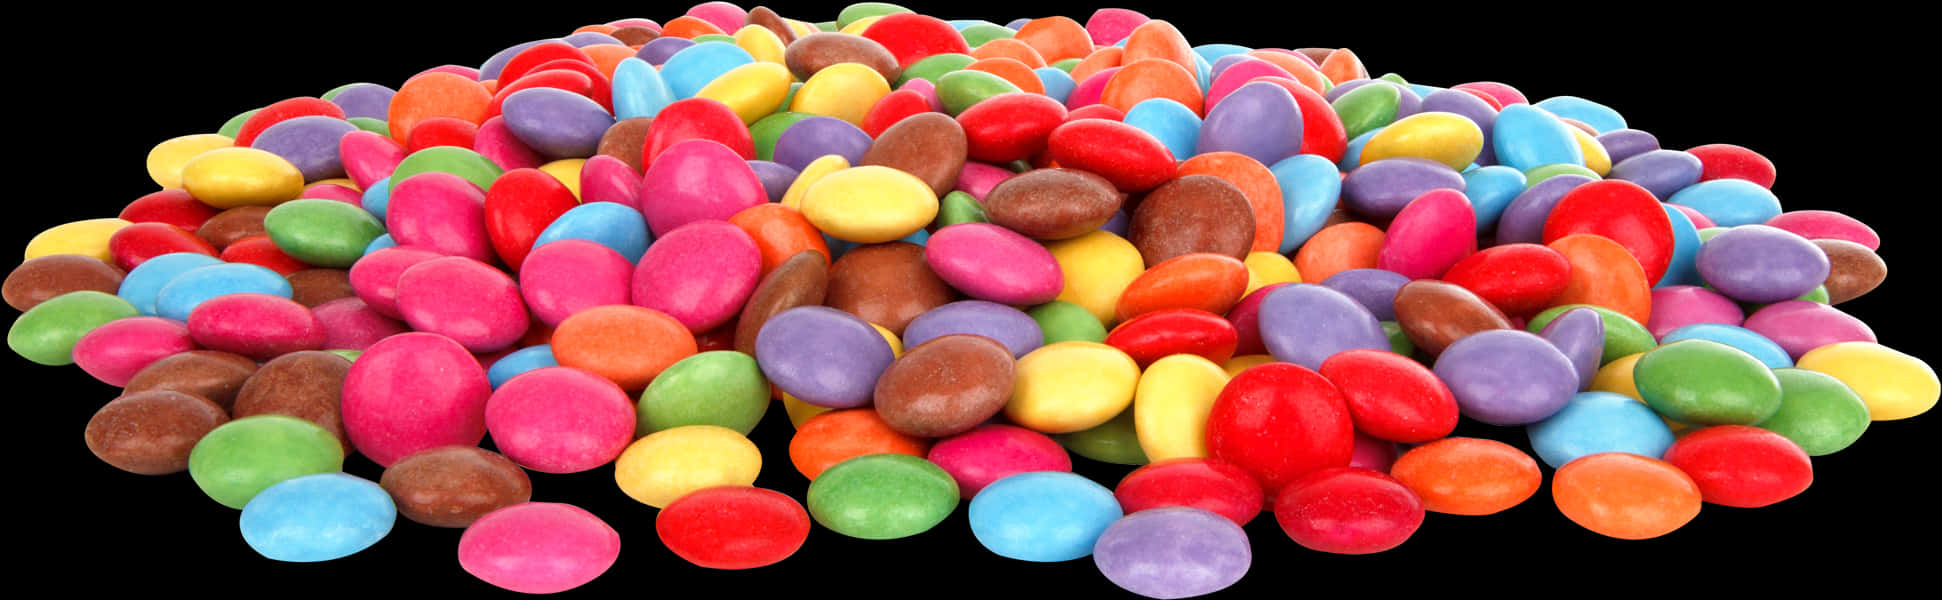 Colorful Candy Coated Chocolates.jpg PNG